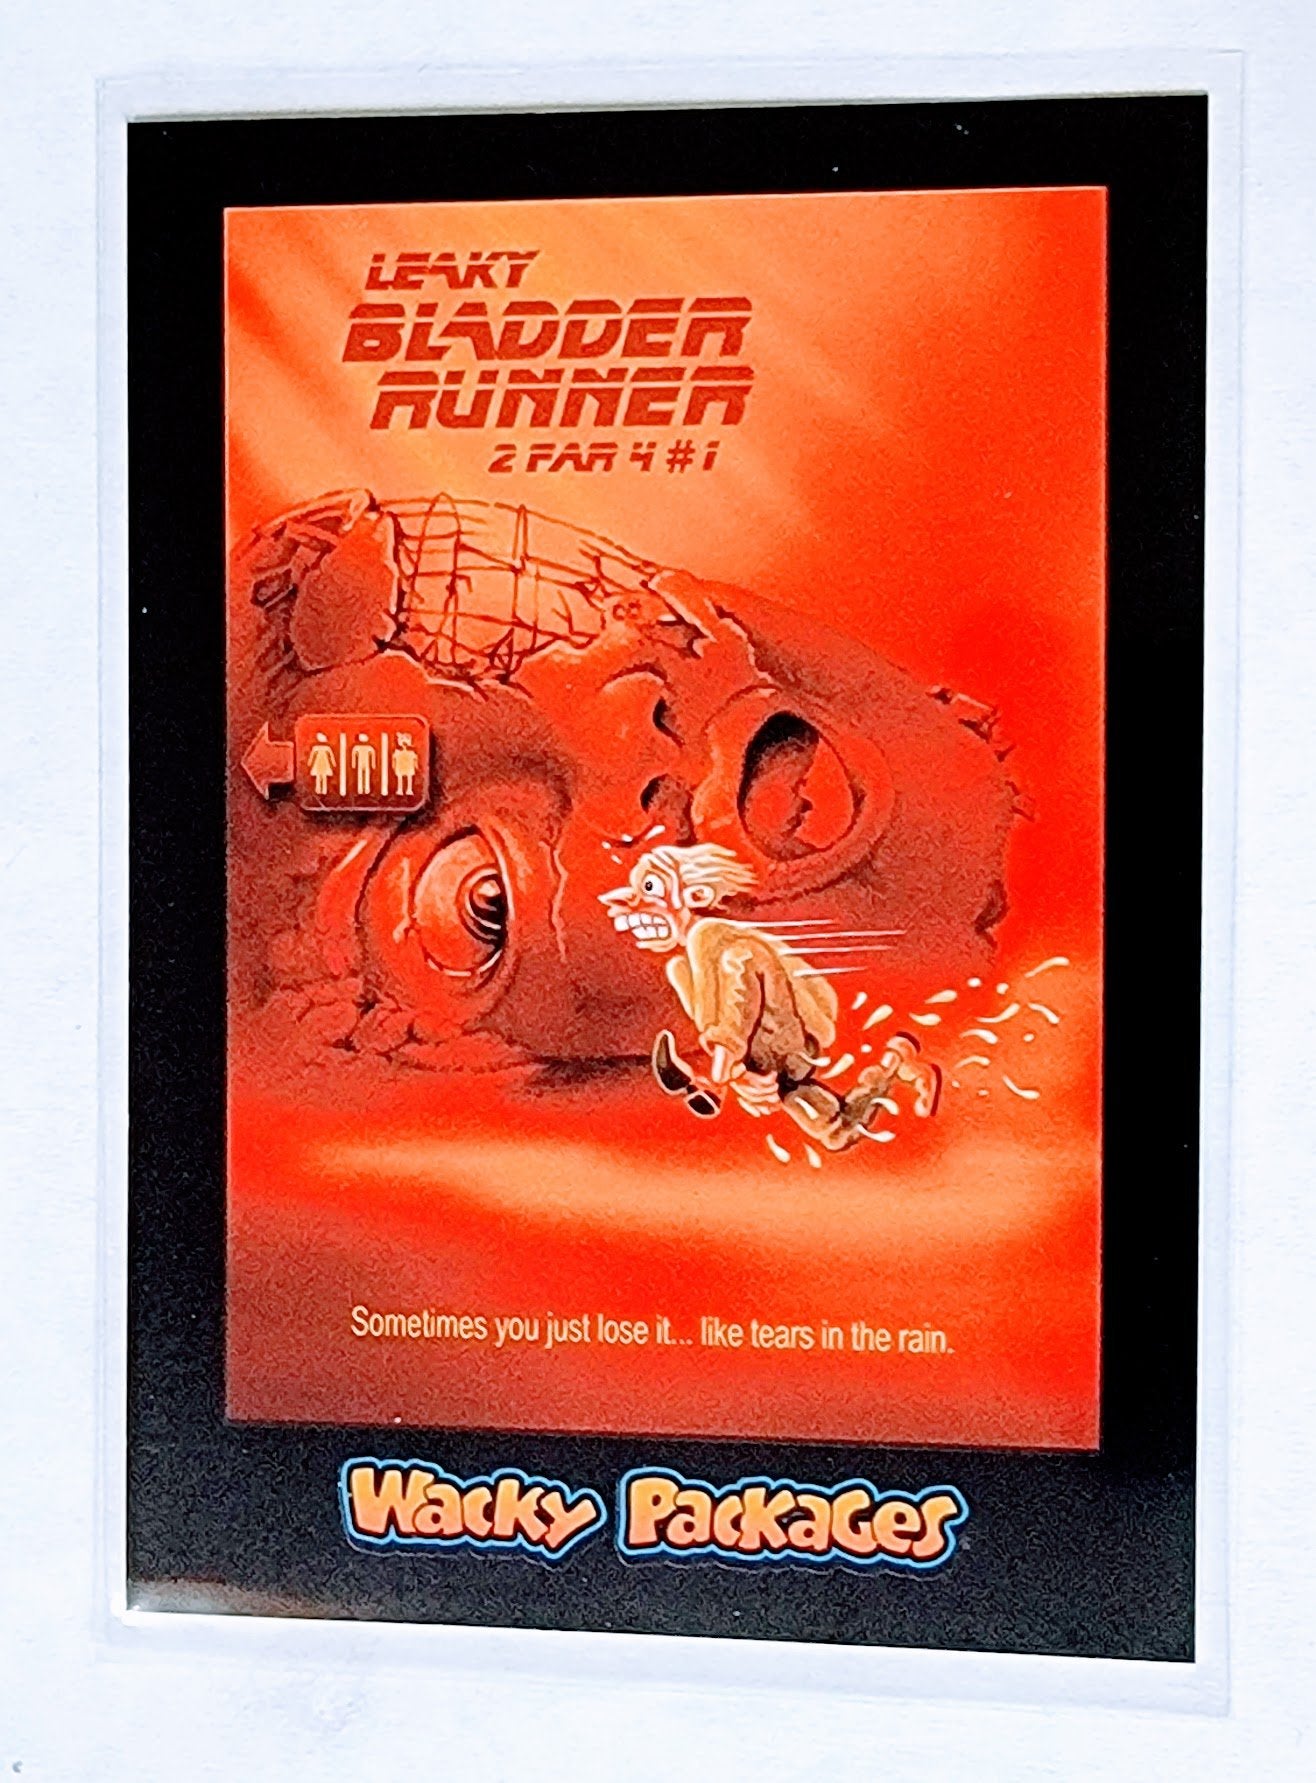 2017 Wacky Packages 50th Anniversary Leaky Bladder Runner Sticker Trading Card MCSC1 simple Xclusive Collectibles   